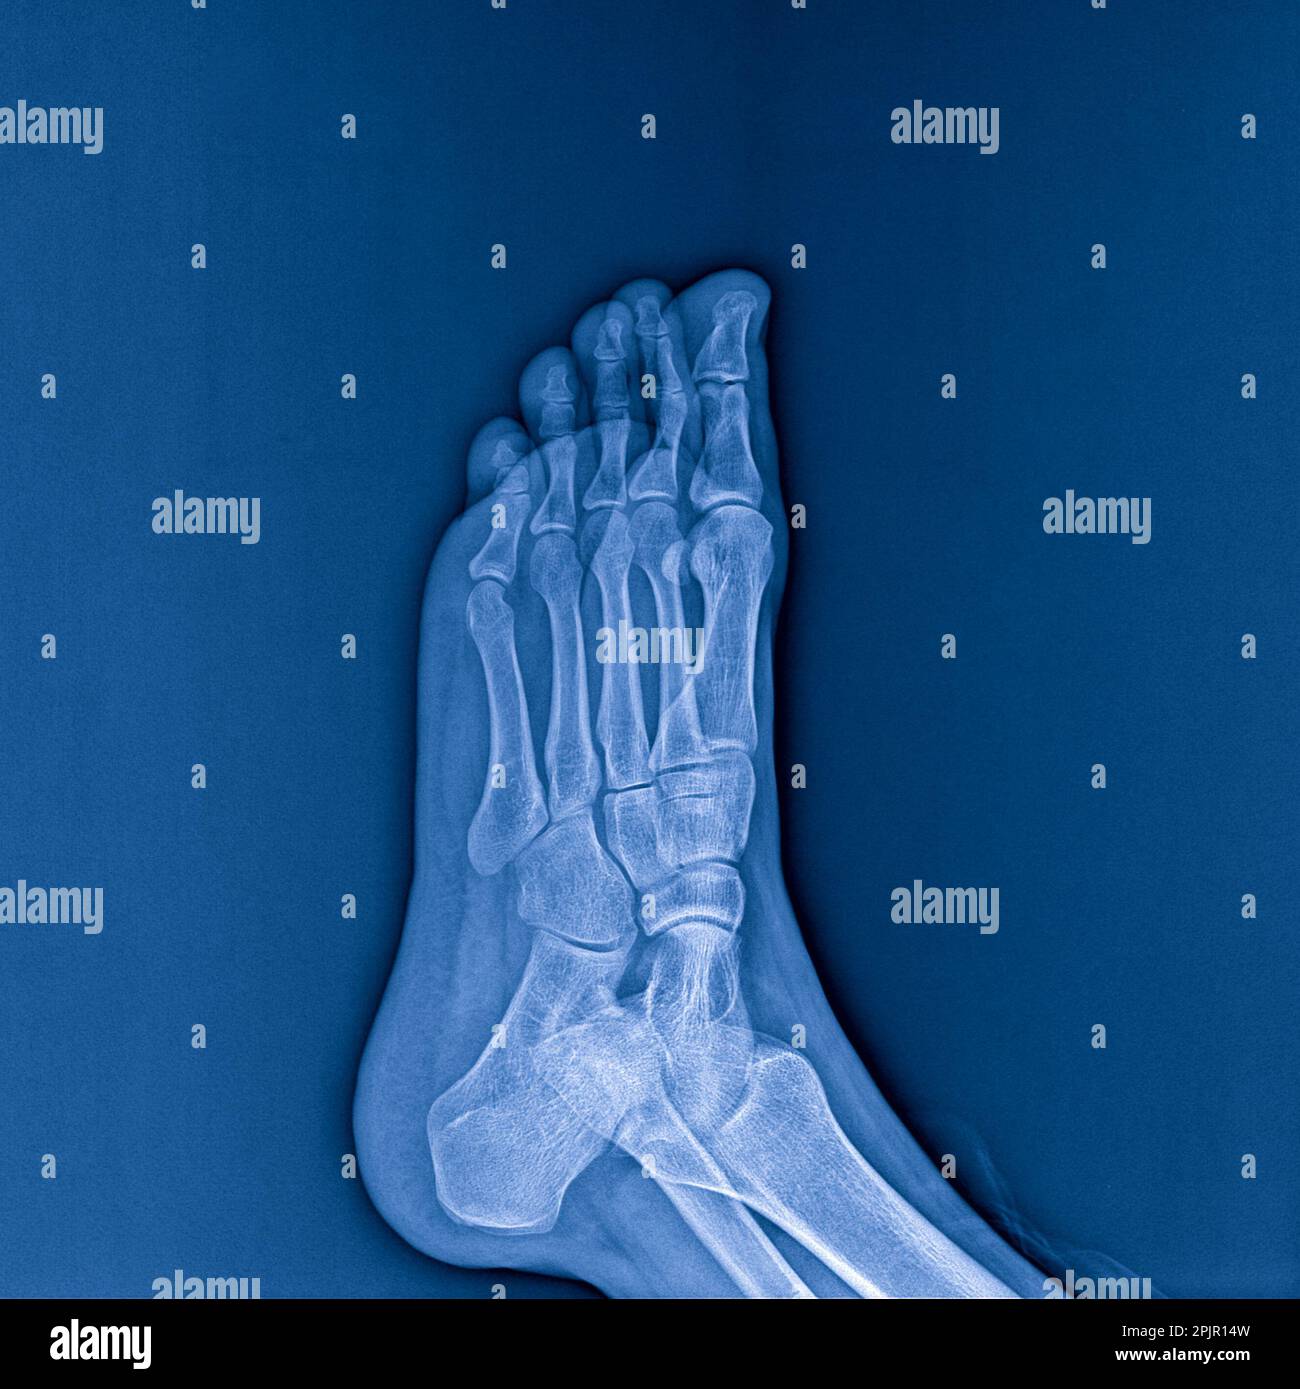 X-ray of foot on dark background, radiograph Stock Photo - Alamy